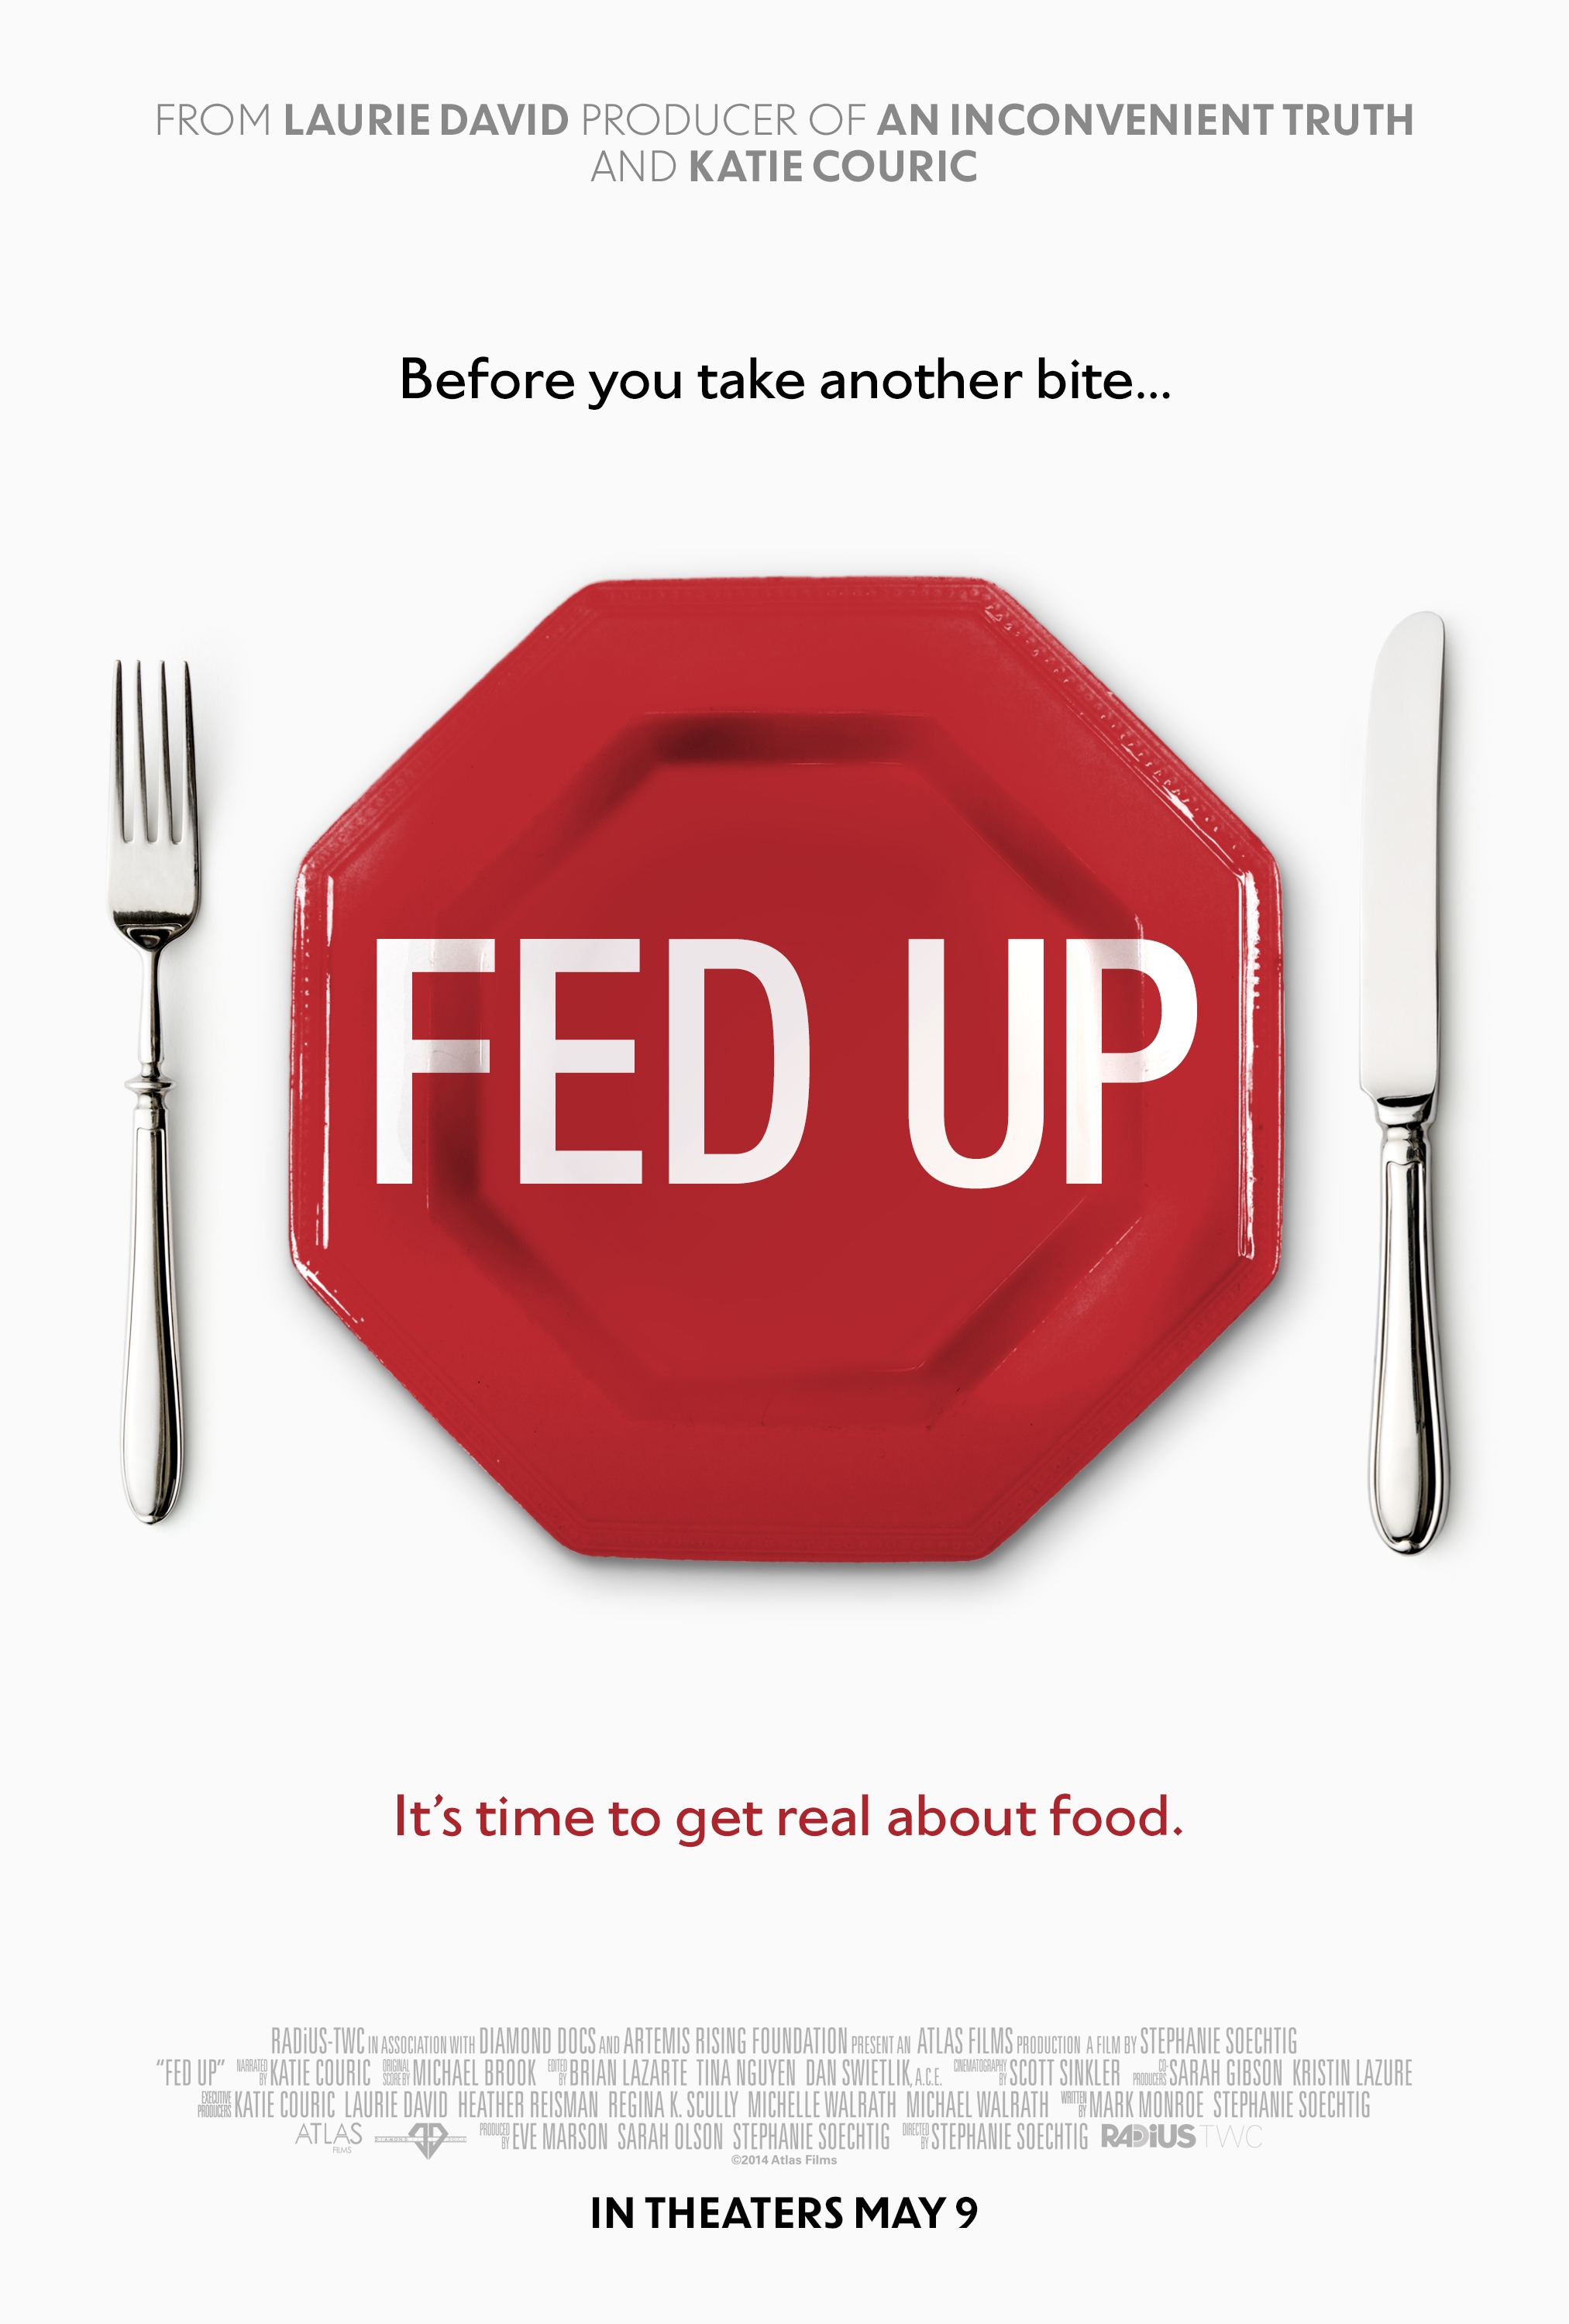 Fed Up: Changing the Way You See Food Forever